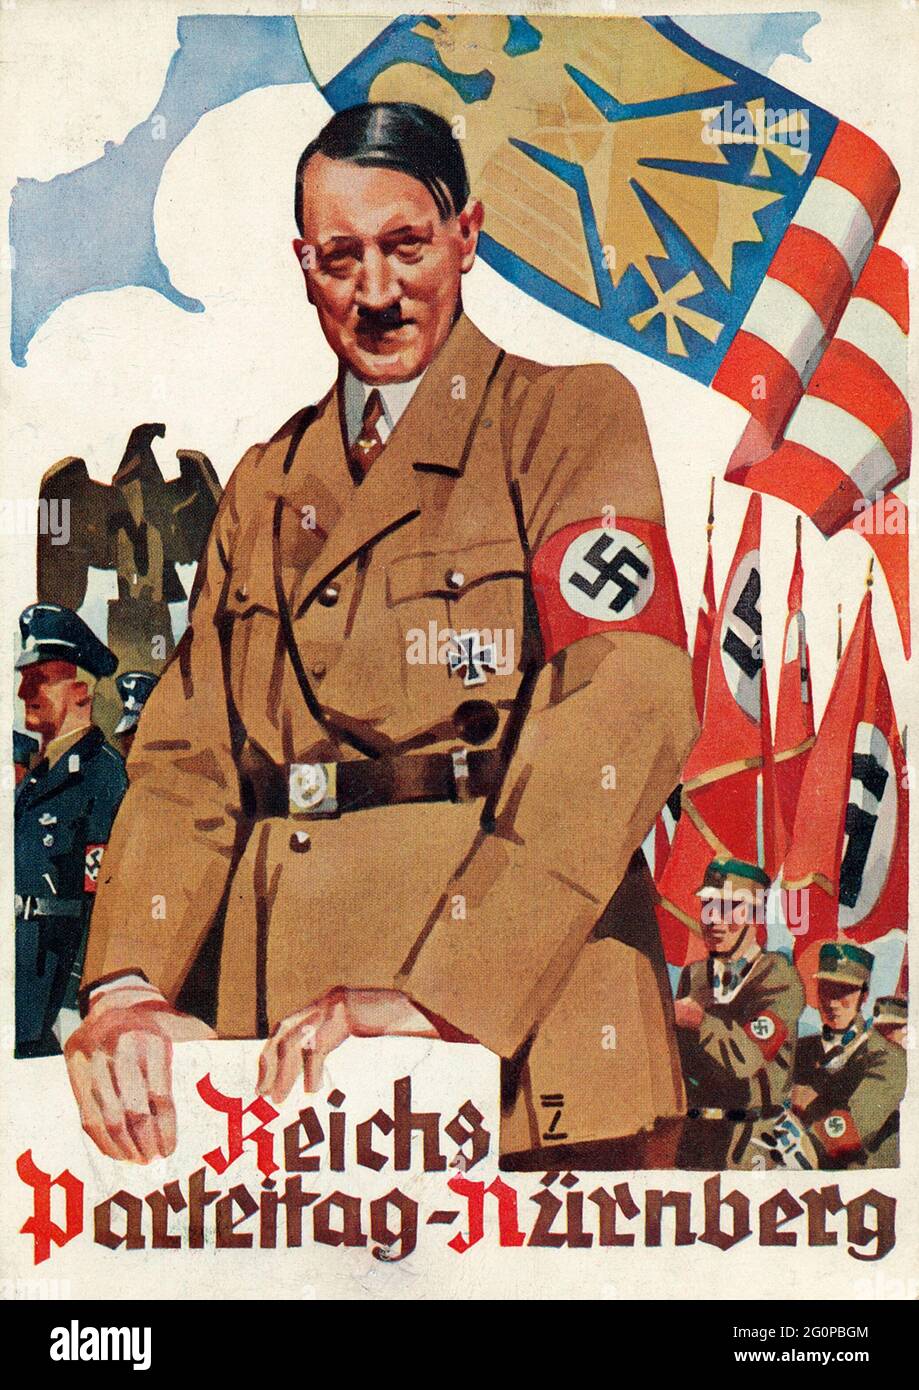 A vintage Nazi propaganda poster for the Nuremberg Party Rally Stock Photo